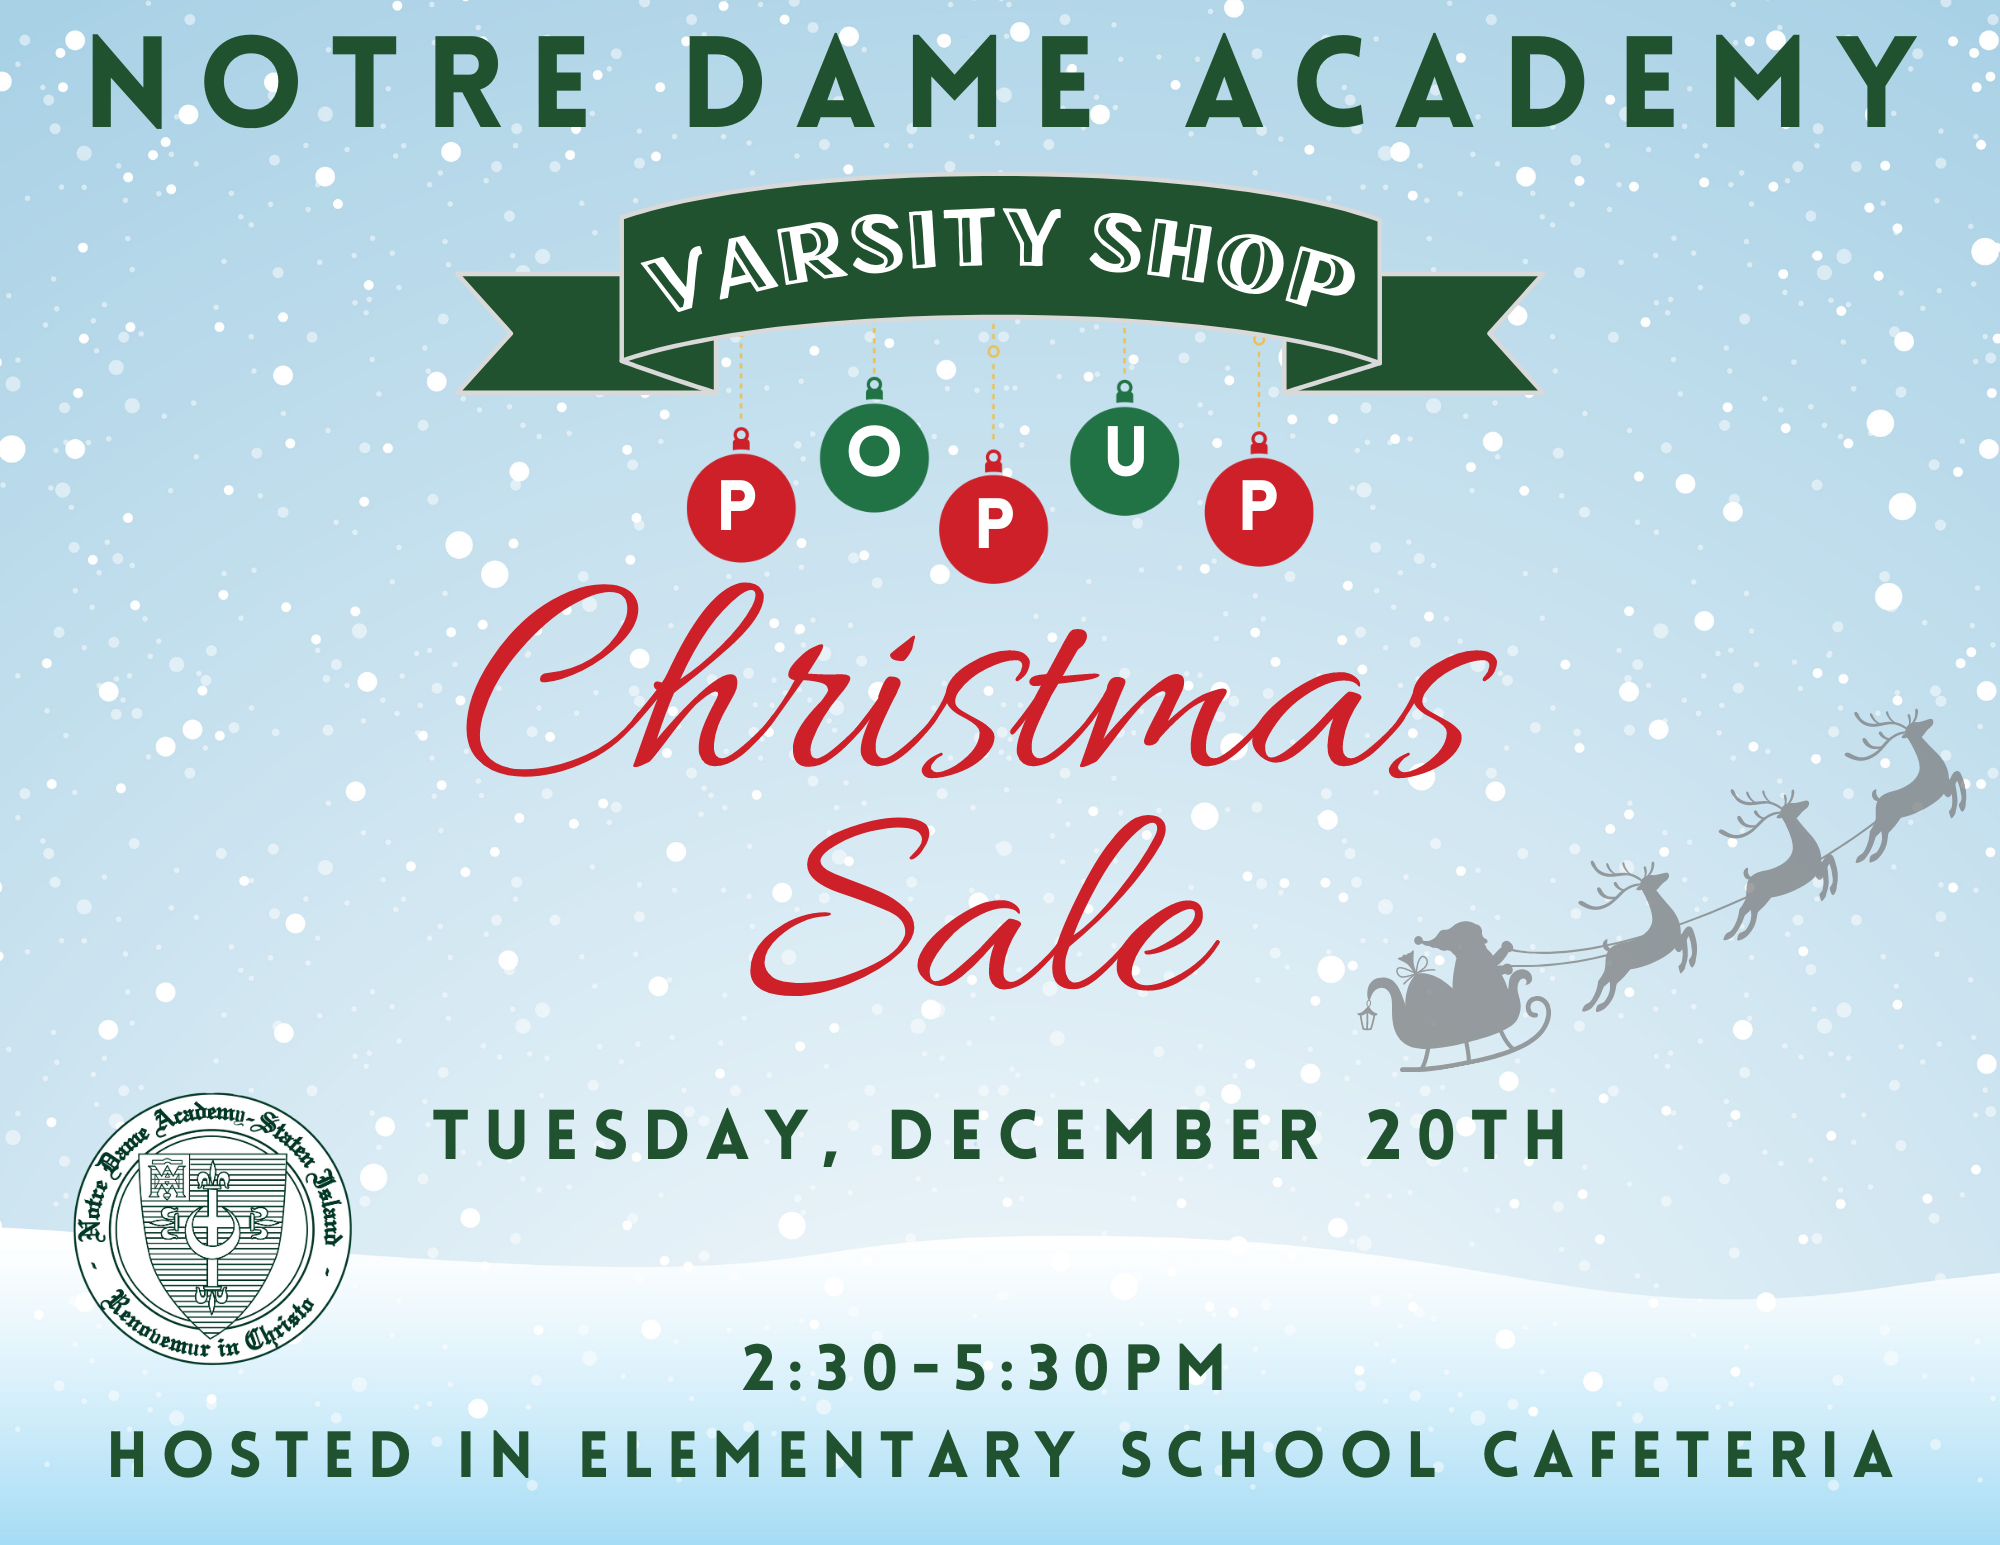 CHRISTMAS SALE - TUESDAY DECEMBER 20TH - 2:30-5:30PM IN THE ELEMENTARY SCHOOL CAFETERIA